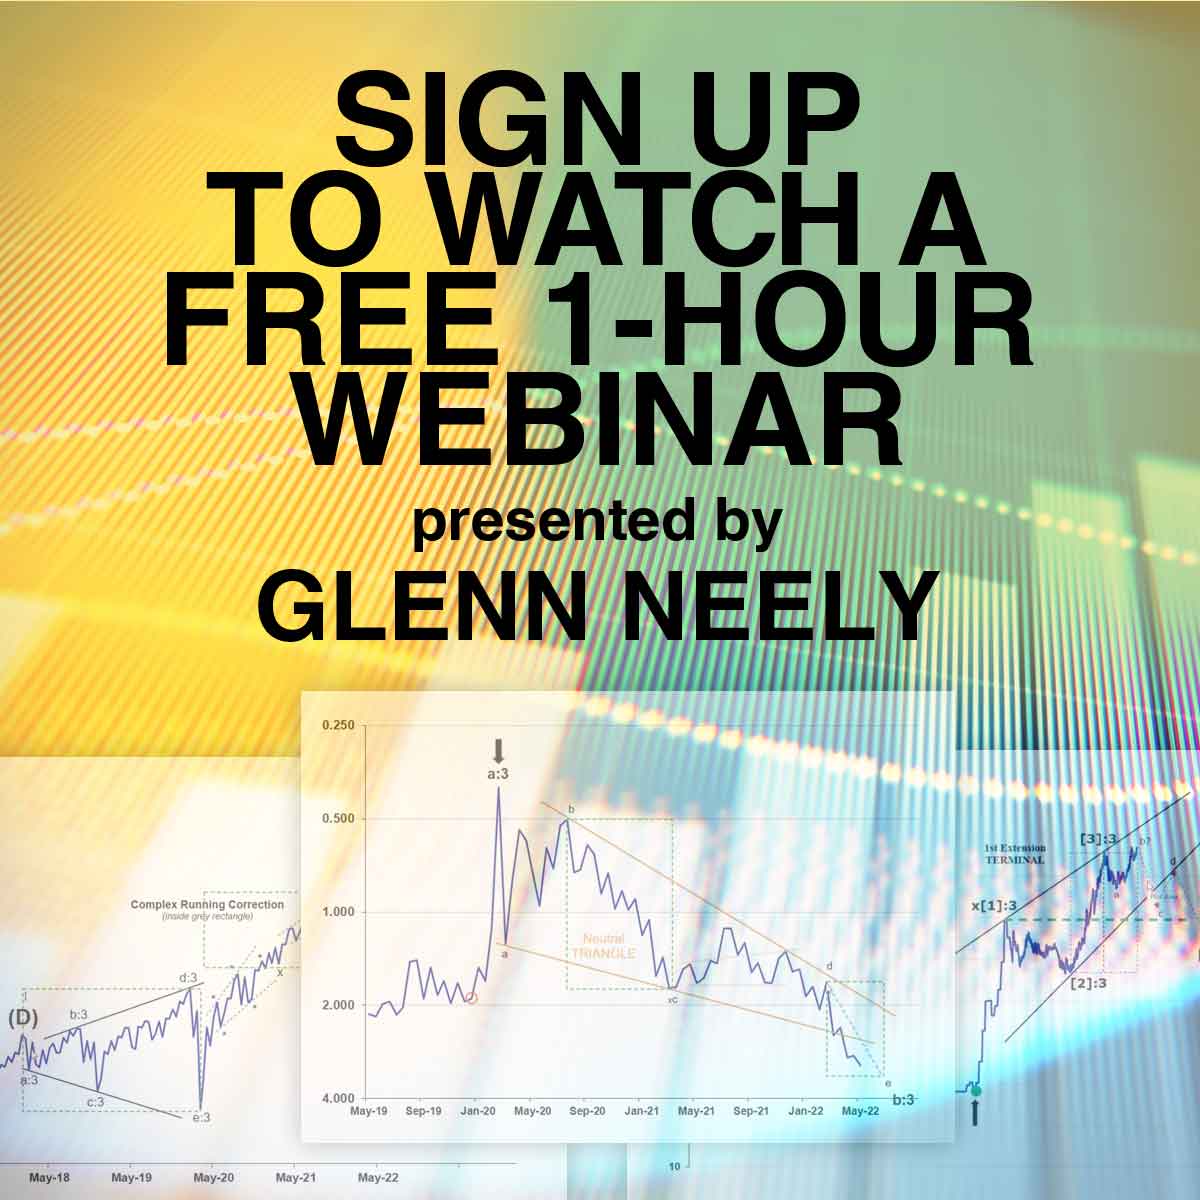 Sign Up for a free 1 hour webinar